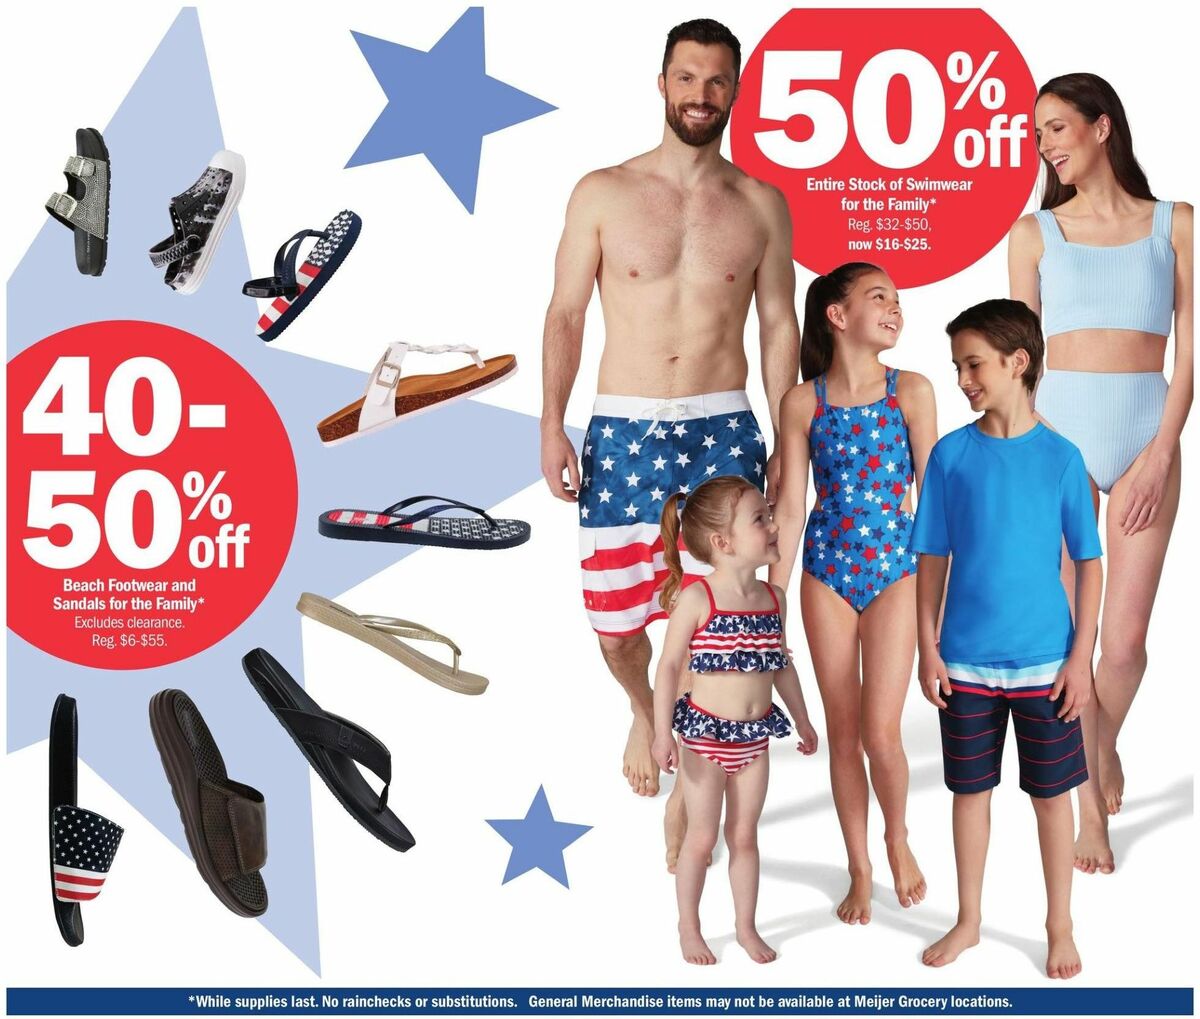 Meijer 4th of July Weekly Ad from June 25